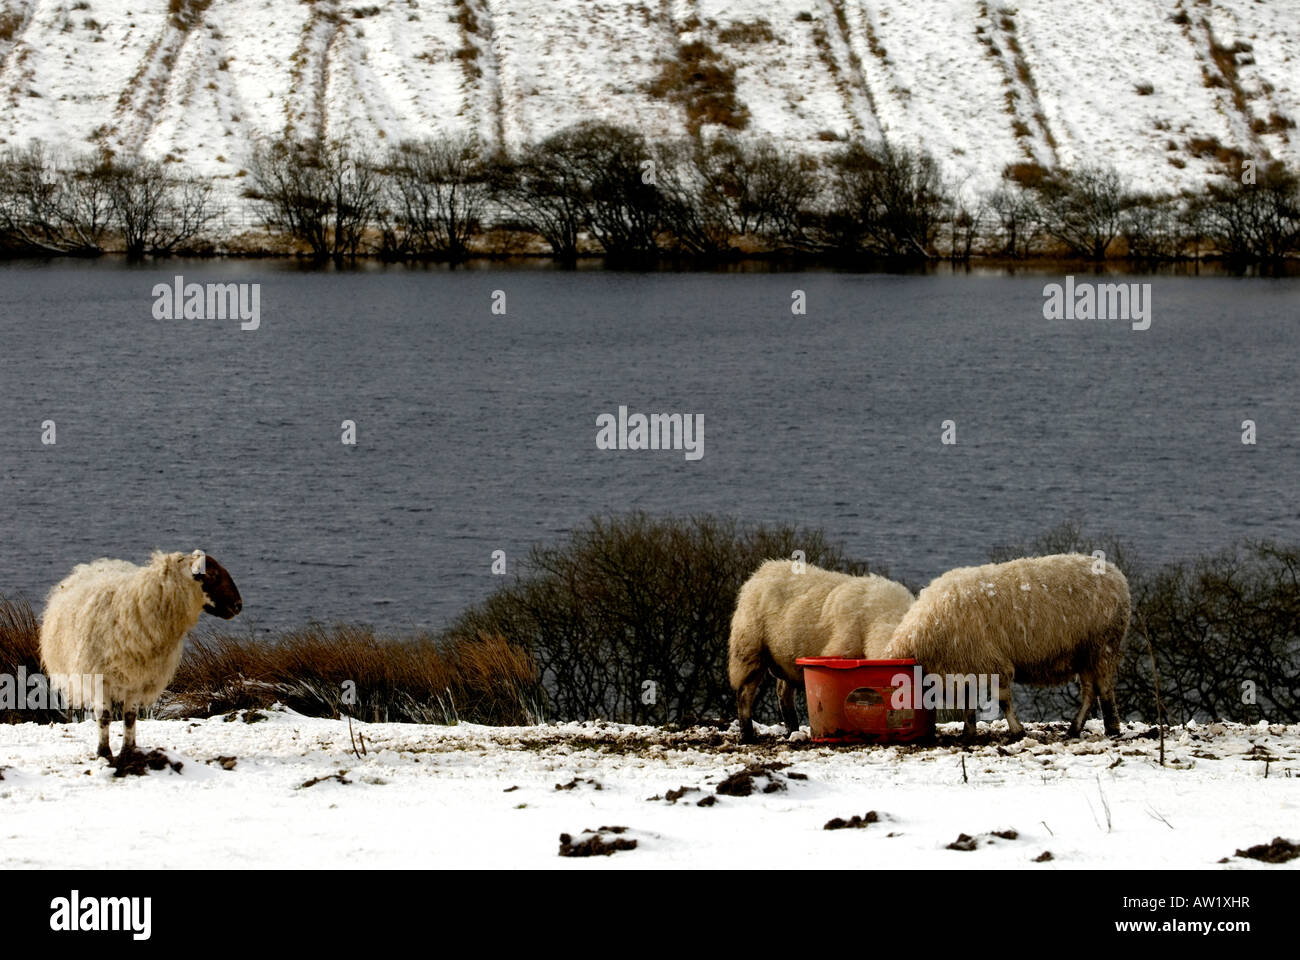 Two sheep eat feed from a bucket while a third looks on. With snow on the ground the animals require additional food. Stock Photo